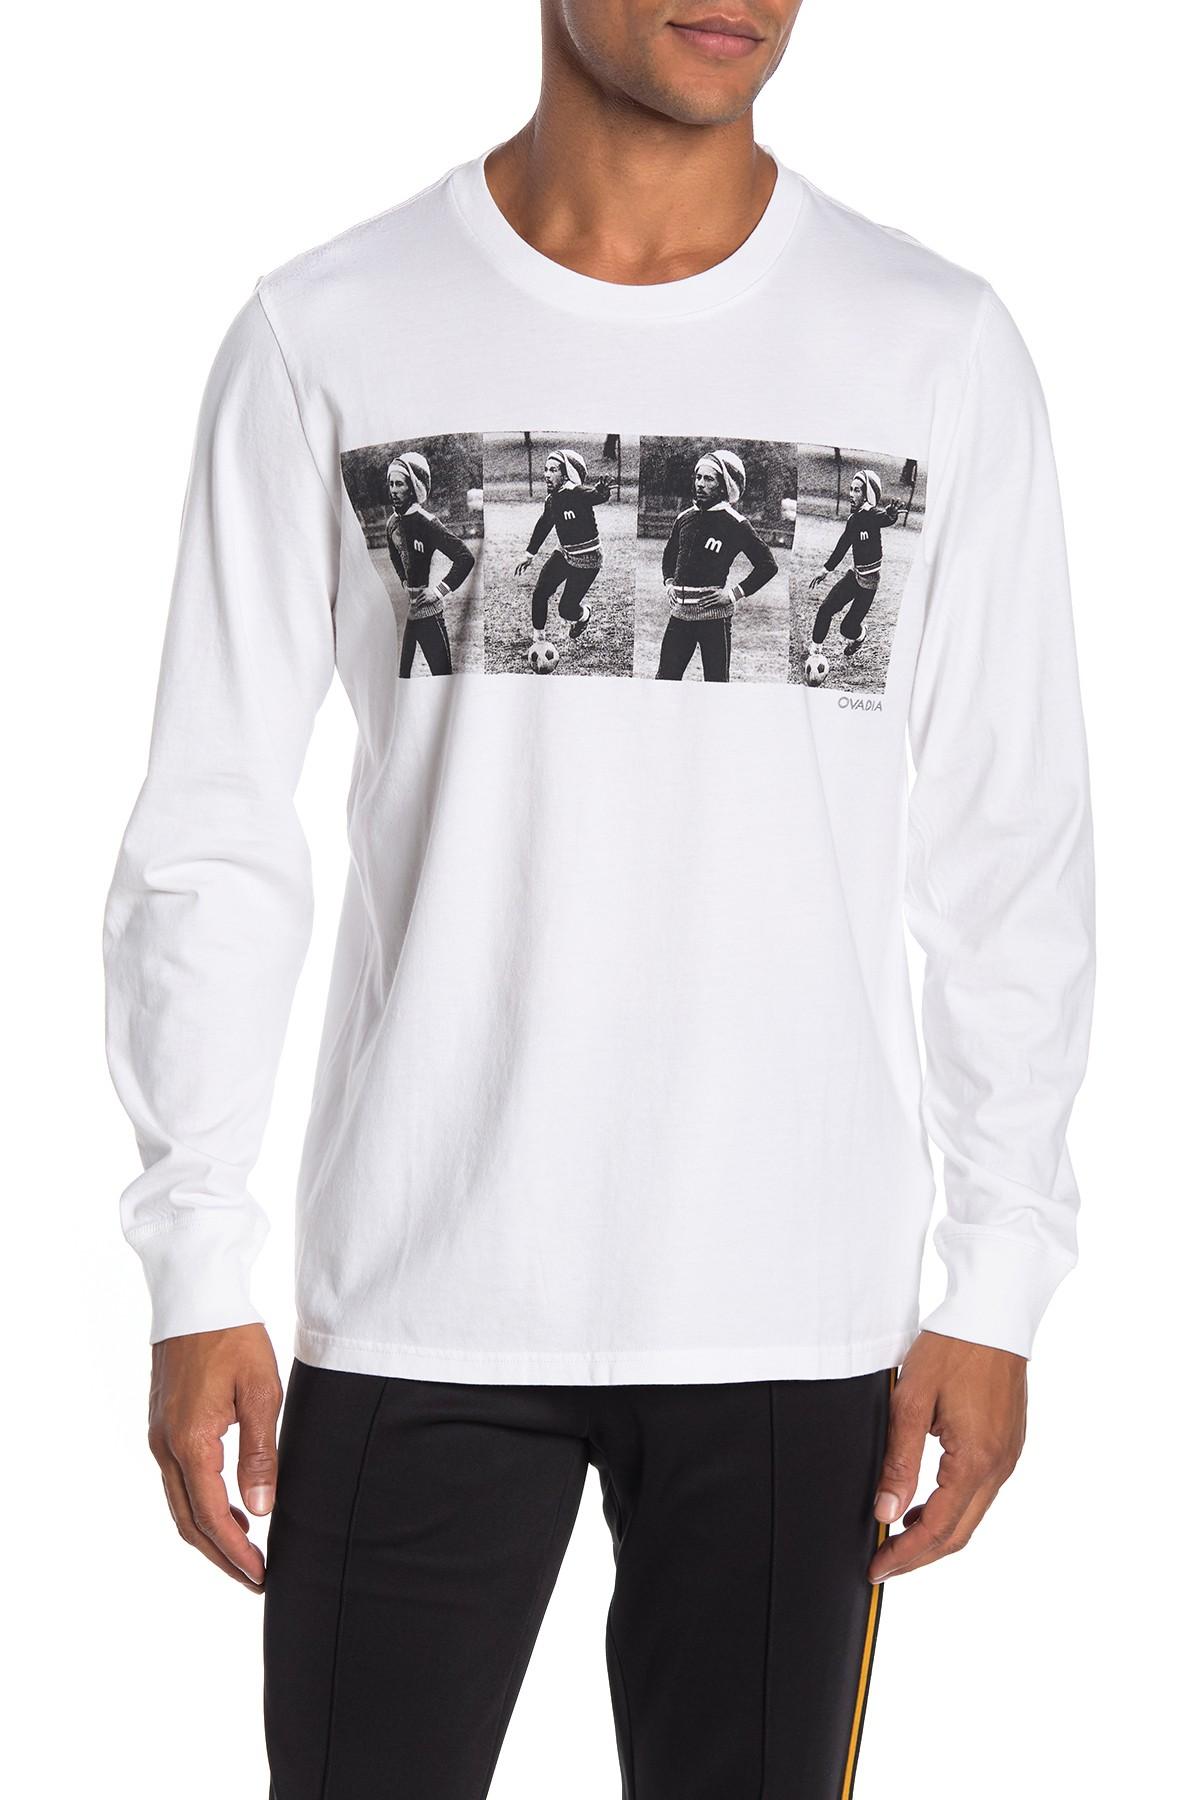 Ovadia And Sons Cotton Men's Bob Marley Playing Soccer Long-sleeve T-shirt  in White for Men - Lyst